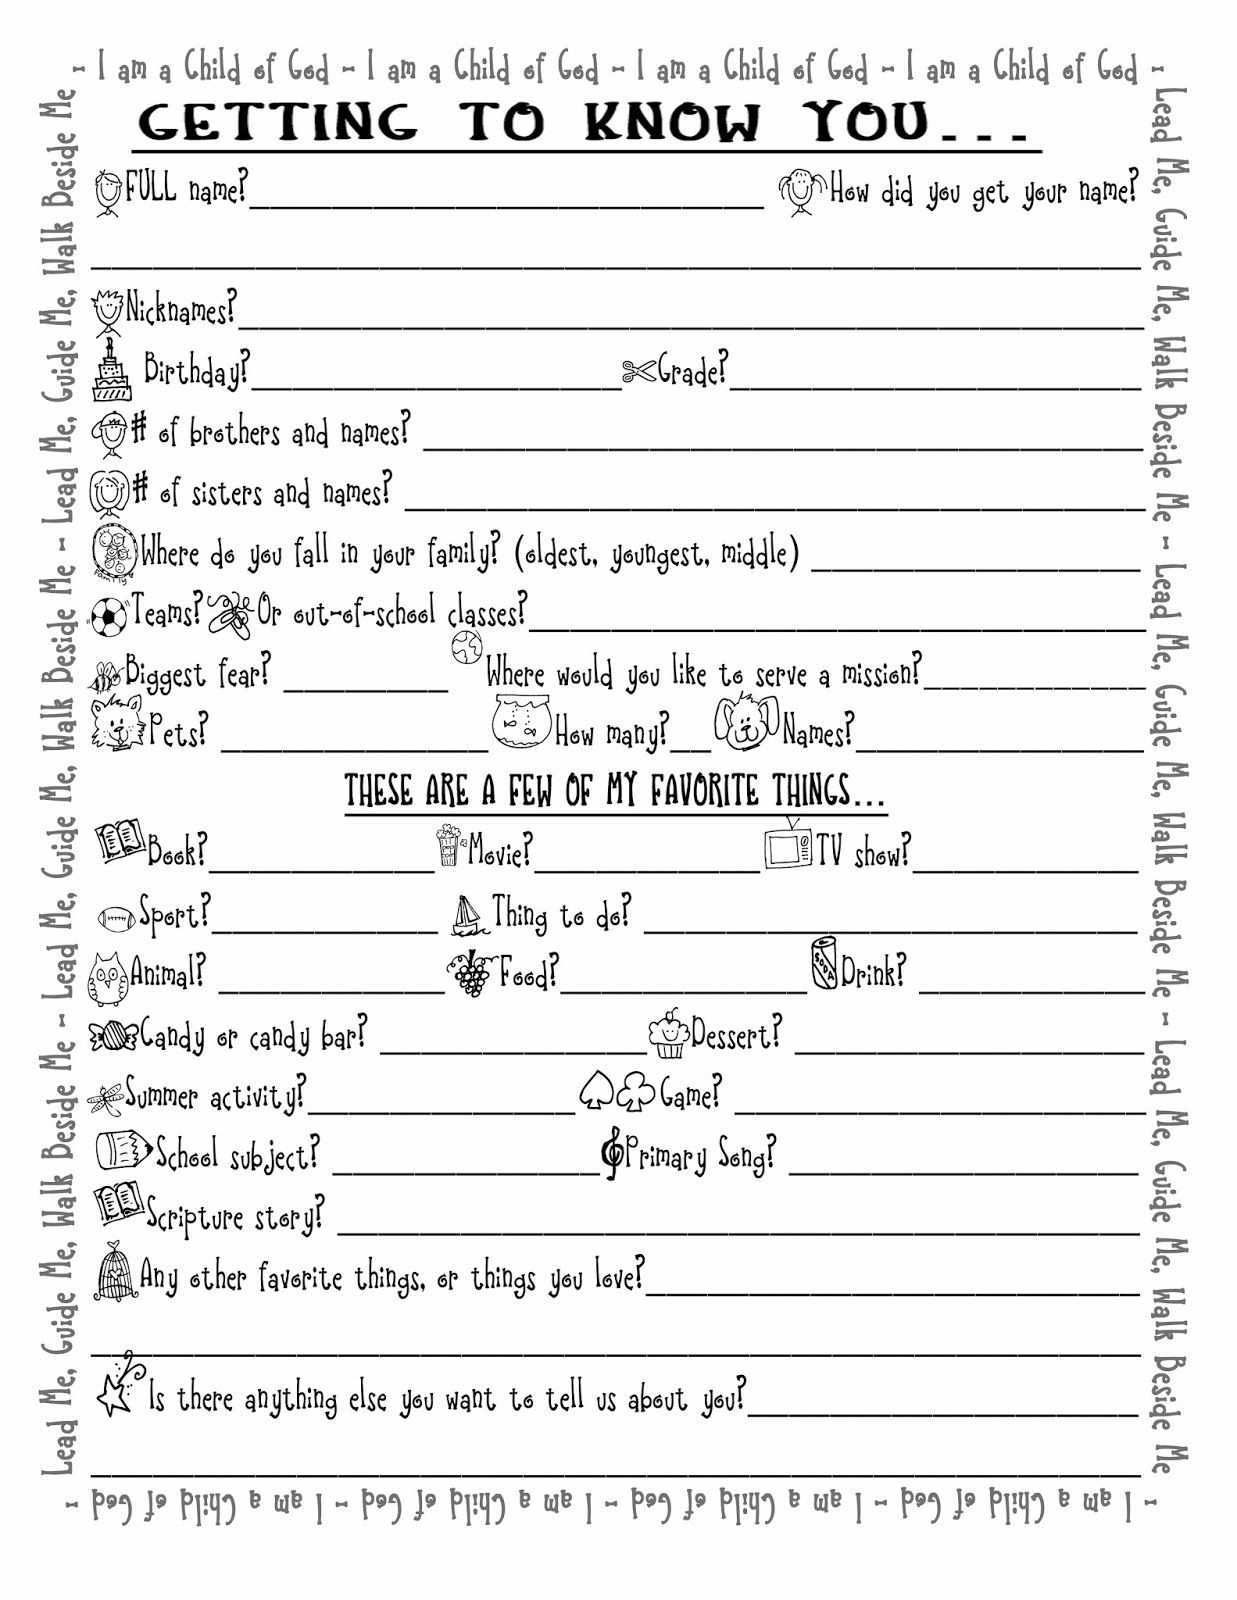 Get To Know Me Worksheet For Adults Try This Sheet